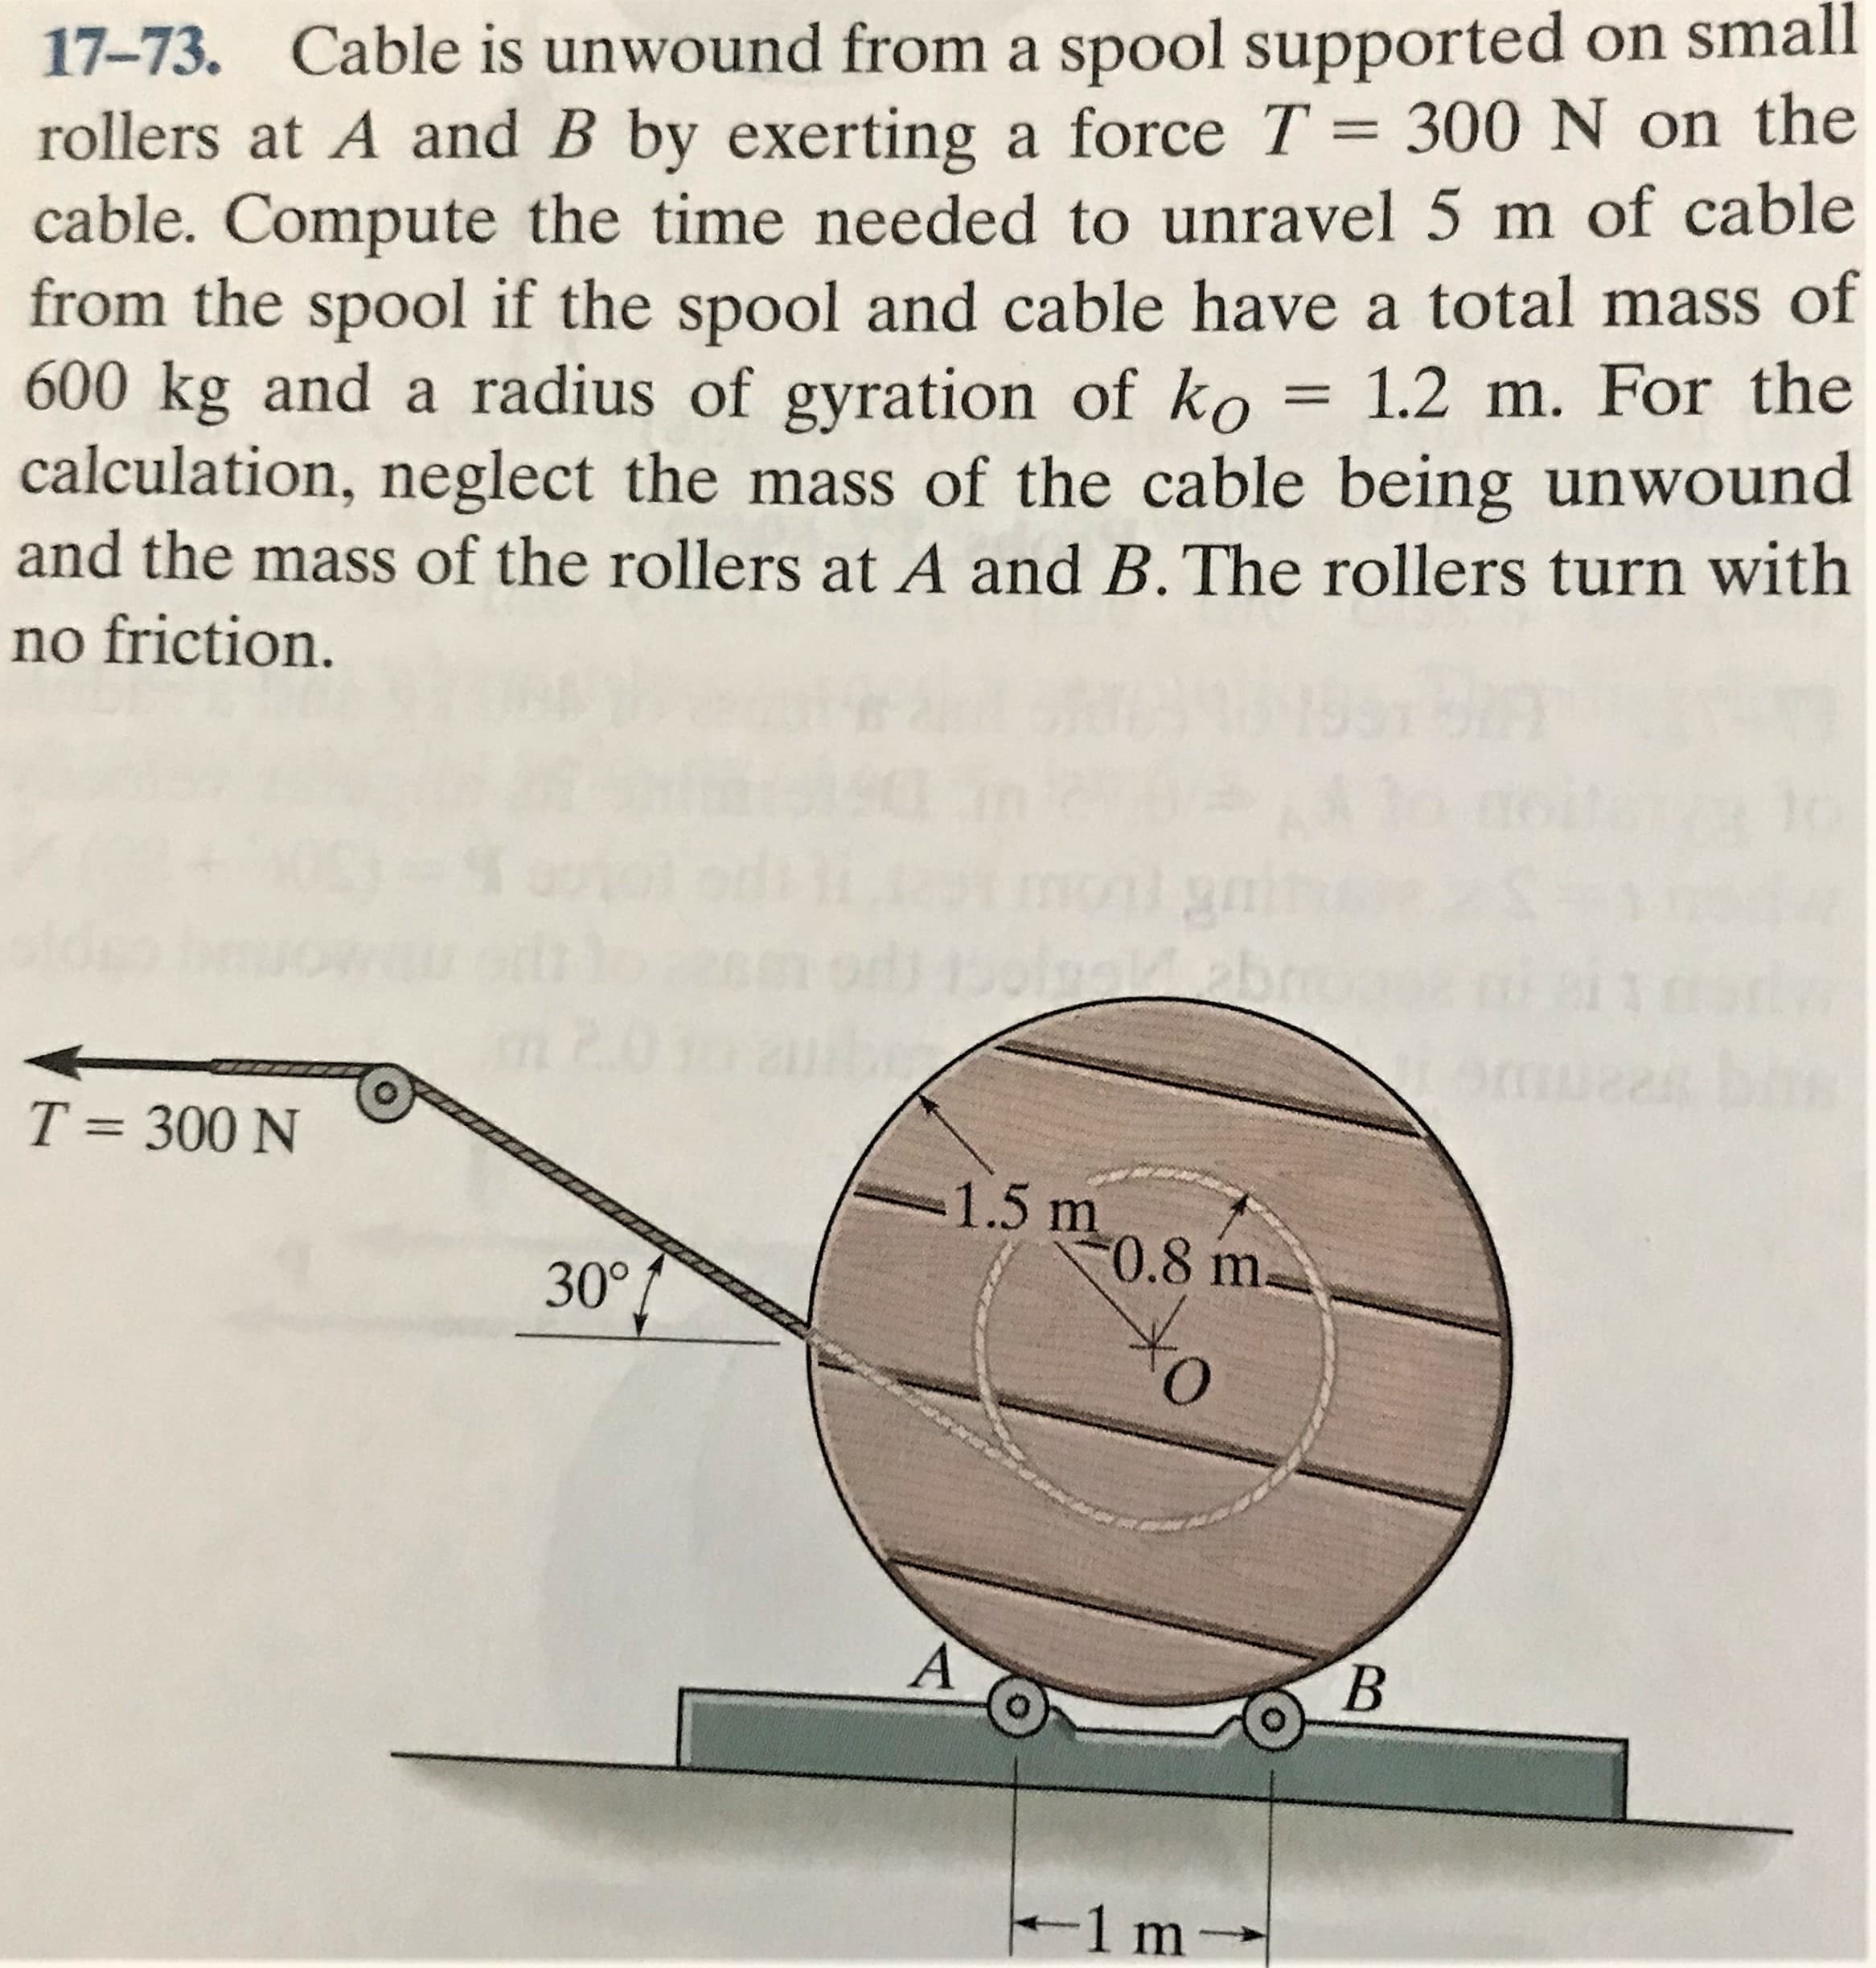 17-73. Cable is unwound from a spool supported on small
rollers at A and B by exerting a force T = 300 N on the
cable. Compute the time needed to unravel 5 m of cable
from the spool if the spool and cable have a total mass of
600 kg and a radius of gyration of ko = 1.2 m. For the
calculation, neglect the mass of the cable being unwound
and the mass of the rollers at A and B.The rollers turn with
%3|
no friction.
mont
11
T = 300 N
1.5 m
0.8 m-
30°
A'
B
